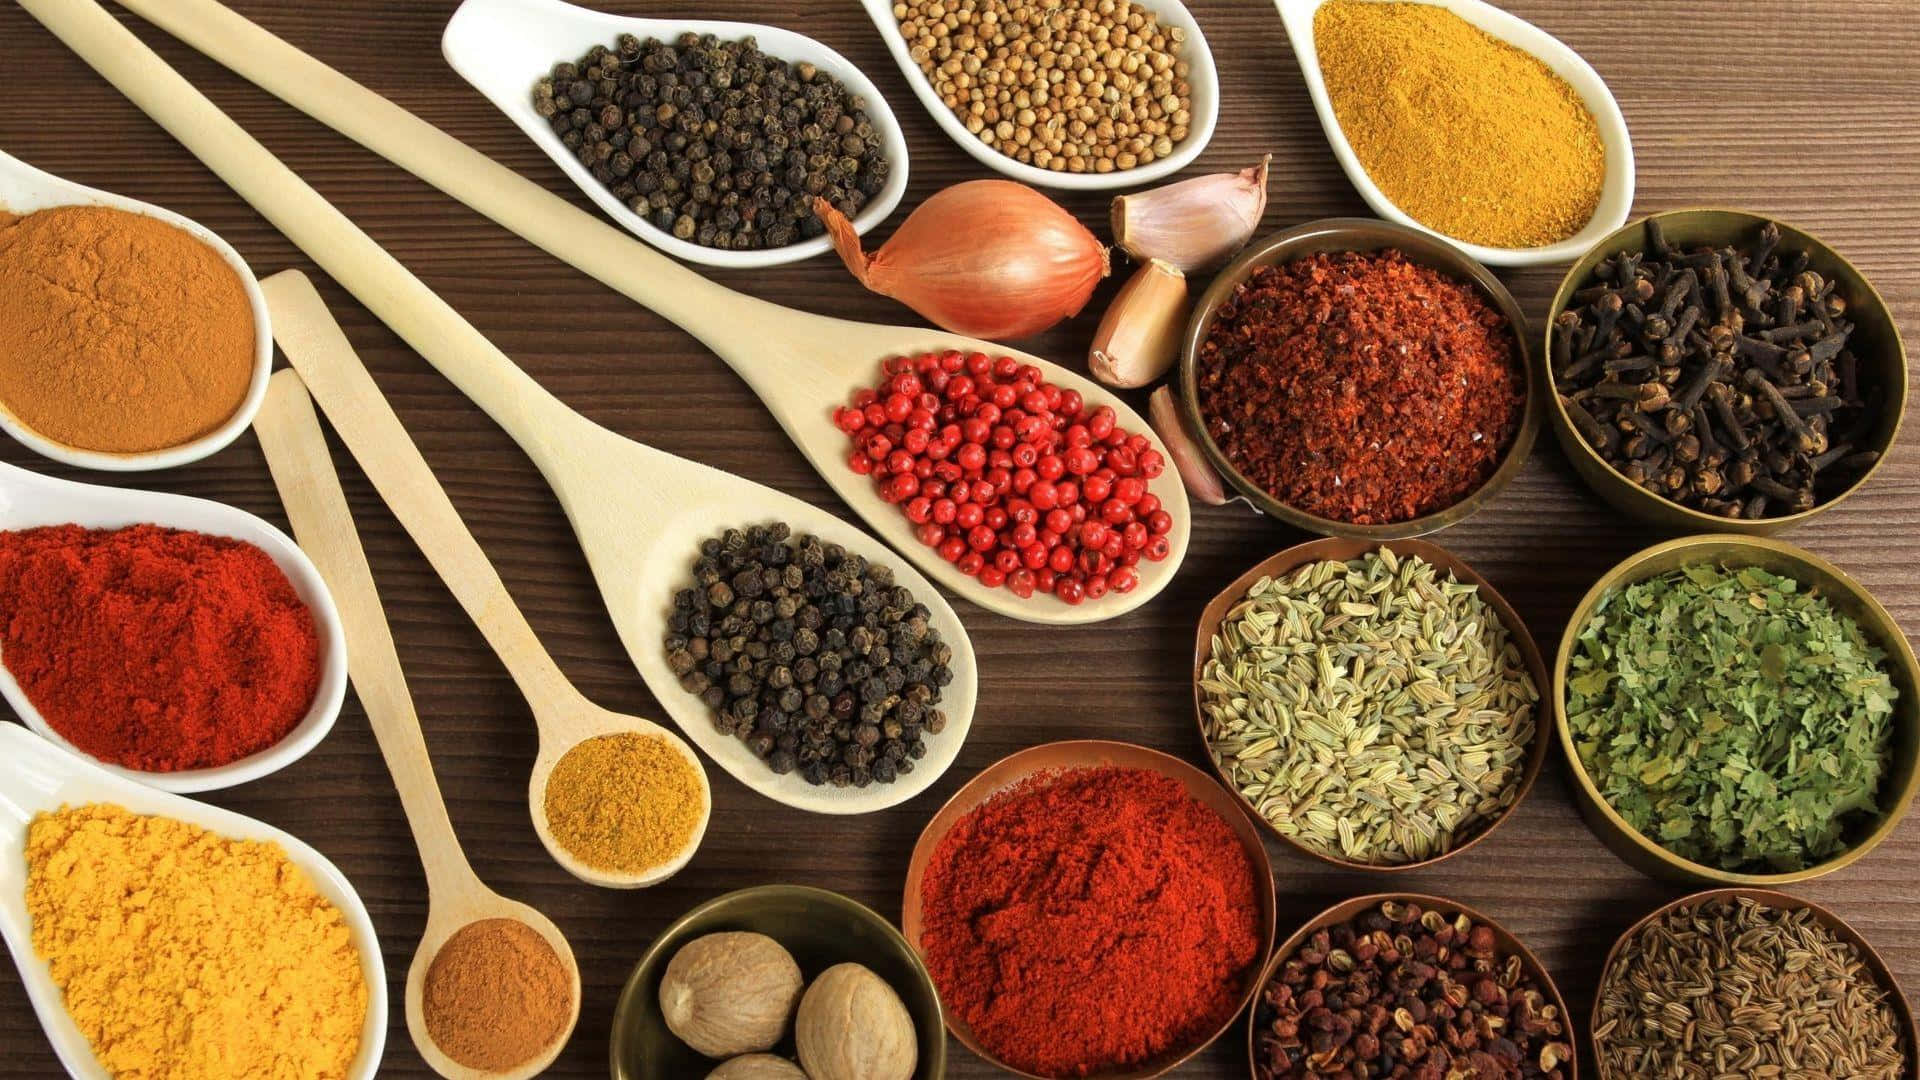 A Variety of Spices for Flavoring Your Dishes